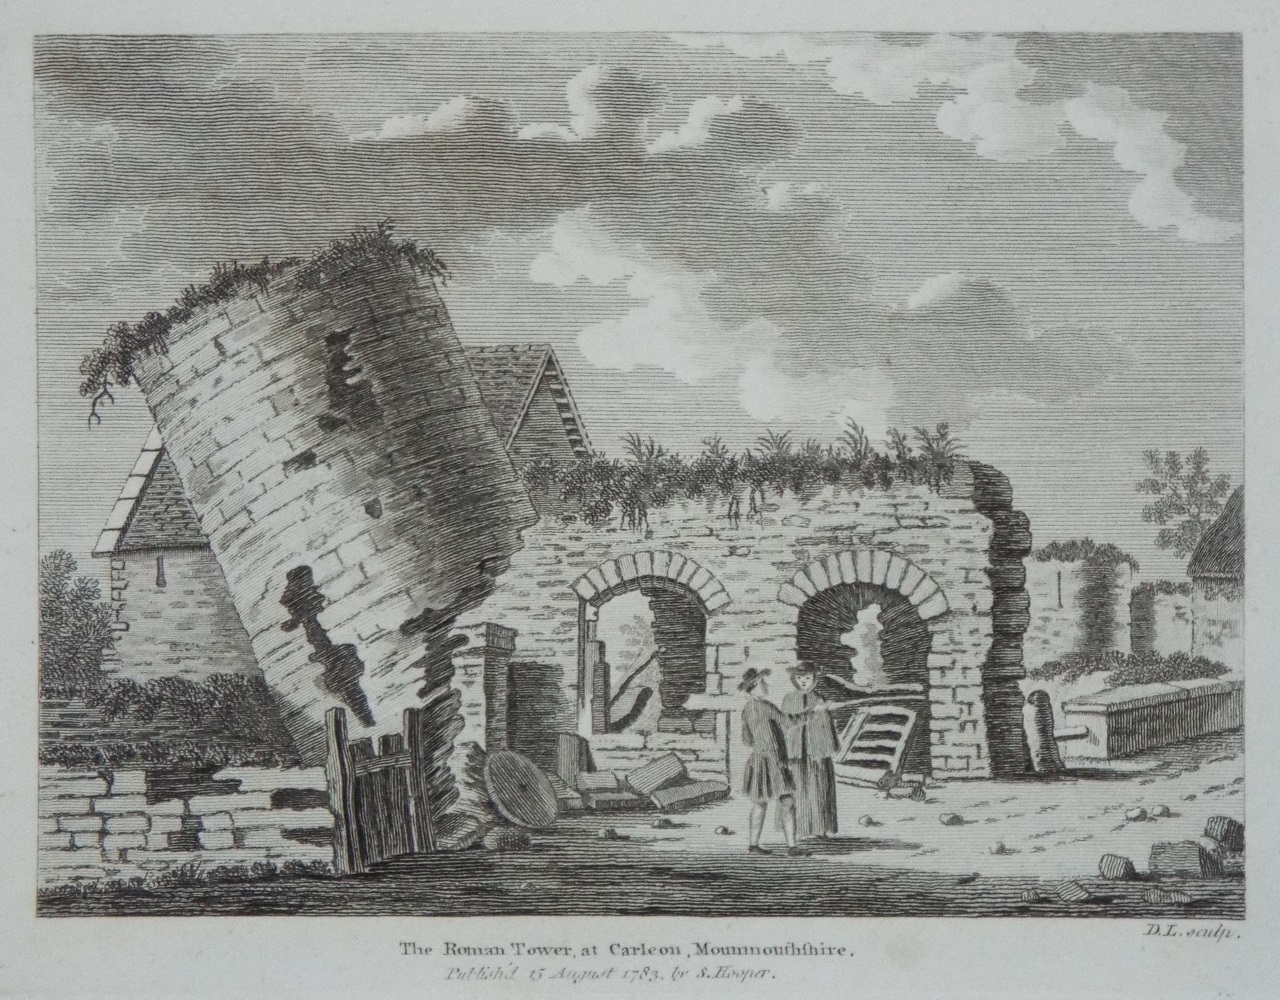 Print - The Roman Tower, at Carleon, Monmouthshire. - D